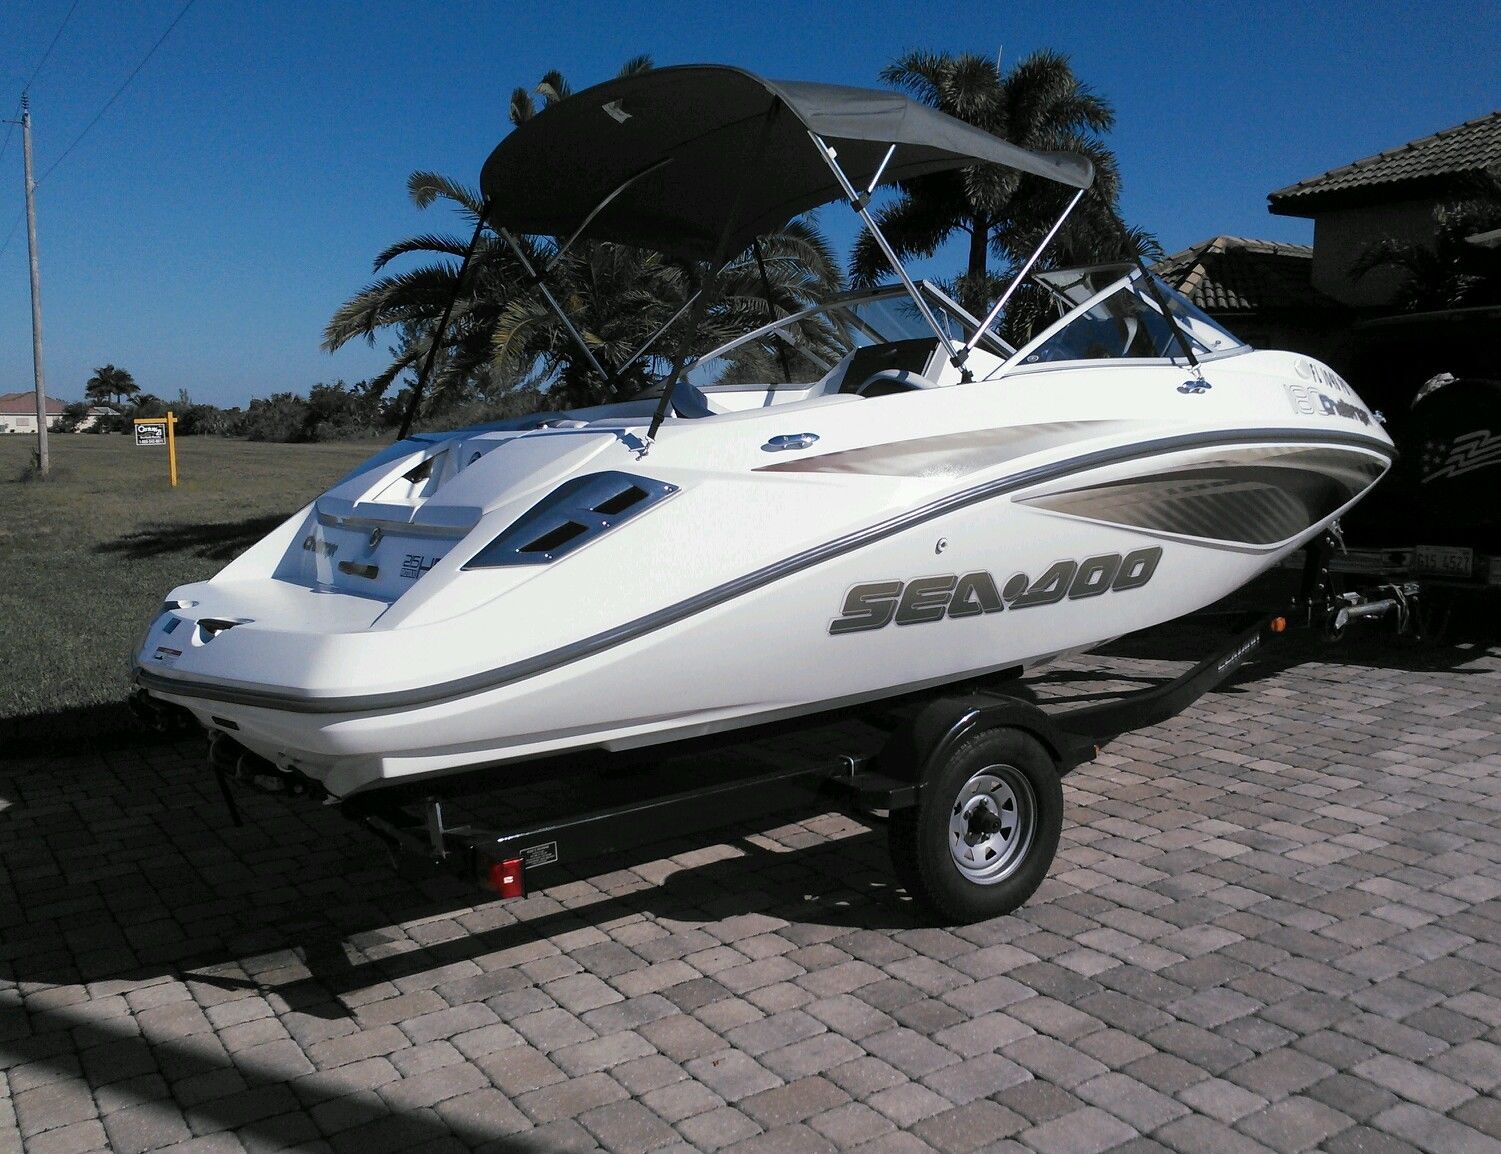 Sea Doo boat for sale from USA